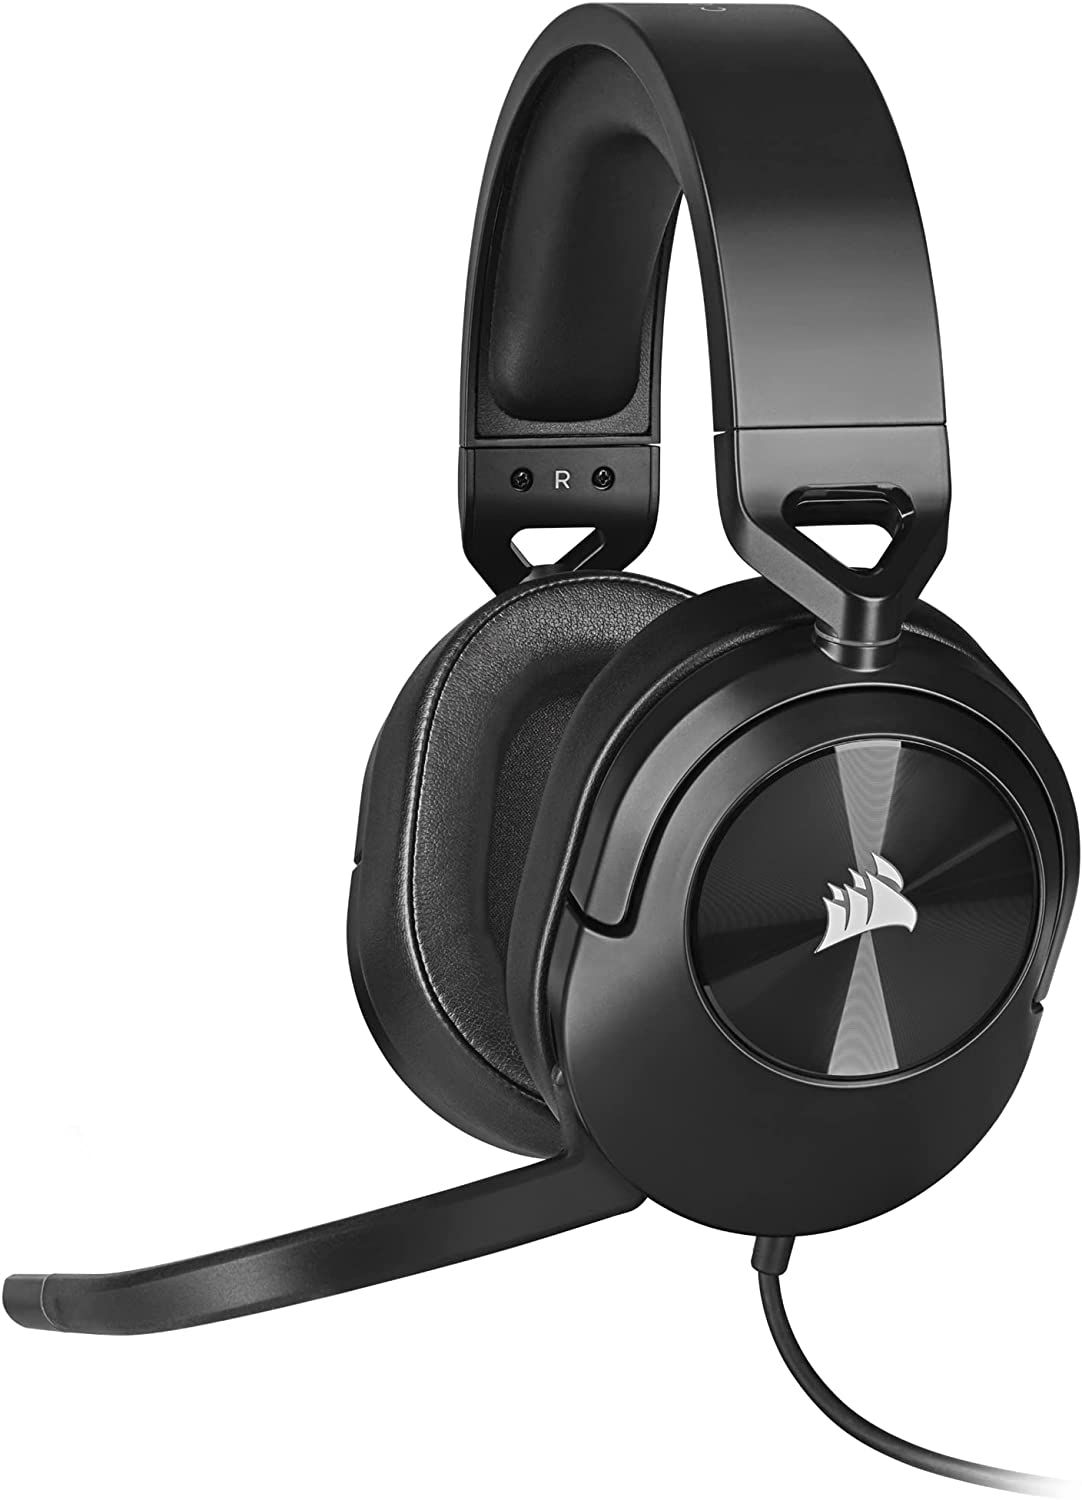 Best 2023 cheap gaming headsets from $25 to $100 - End 2022